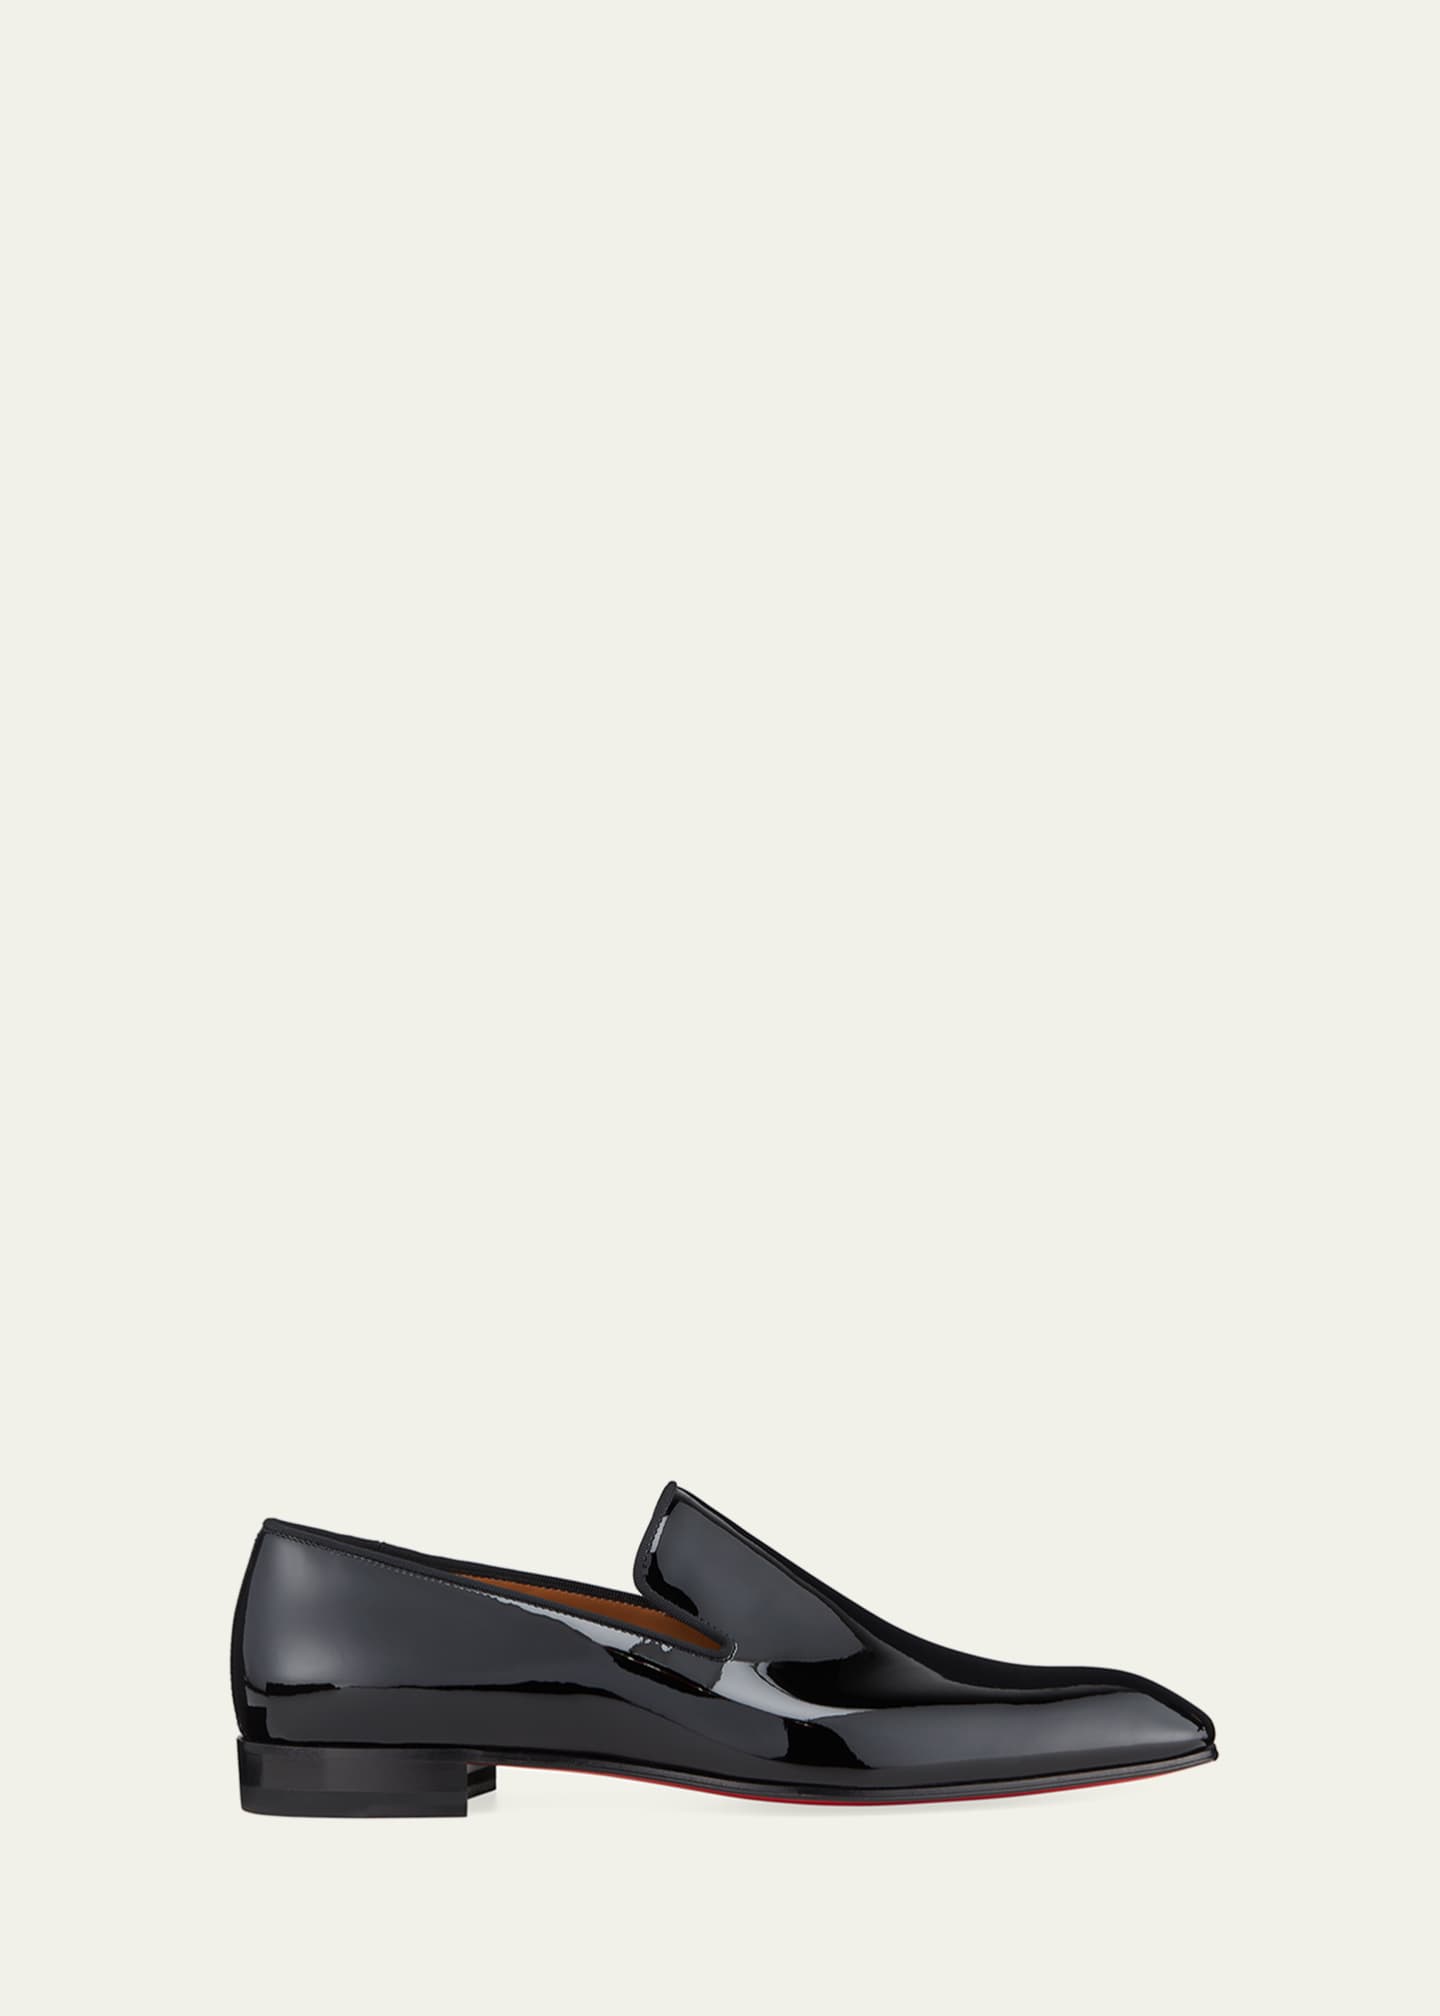 Christian Louboutin Men's Dandelion Patent Leather Loafers - Bergdorf ...